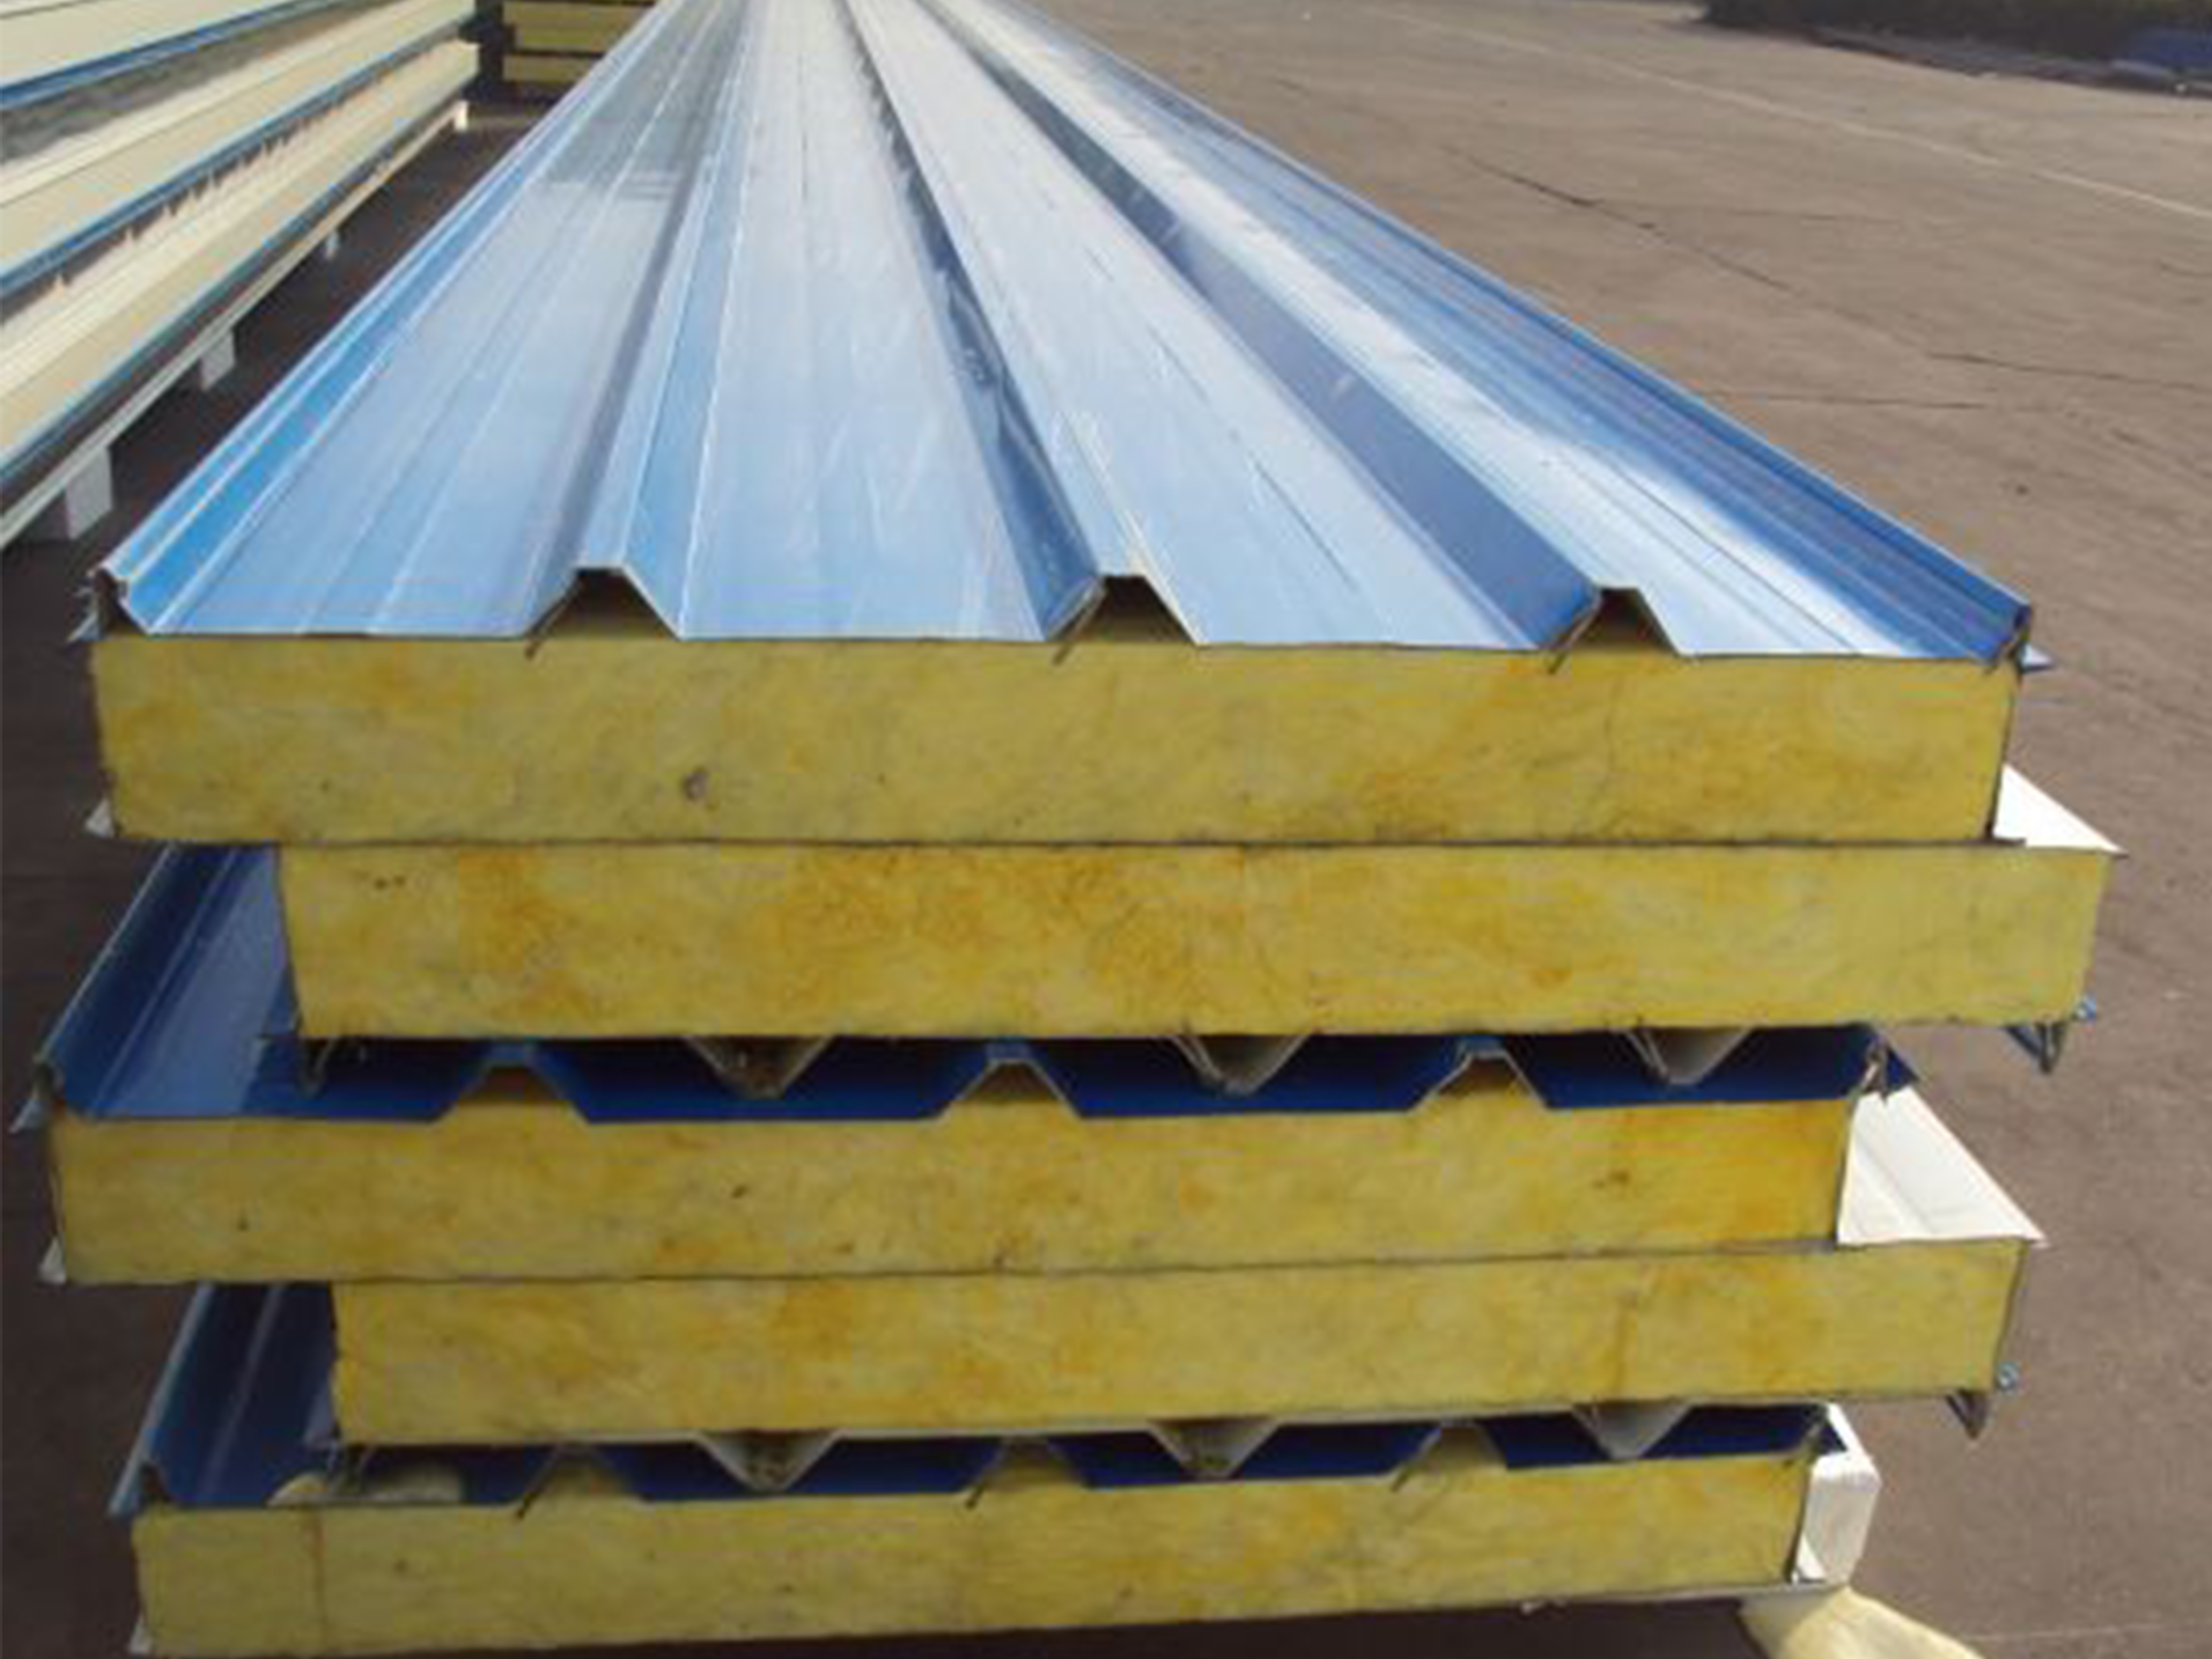 Let's see the features of rockwool sandwich panel